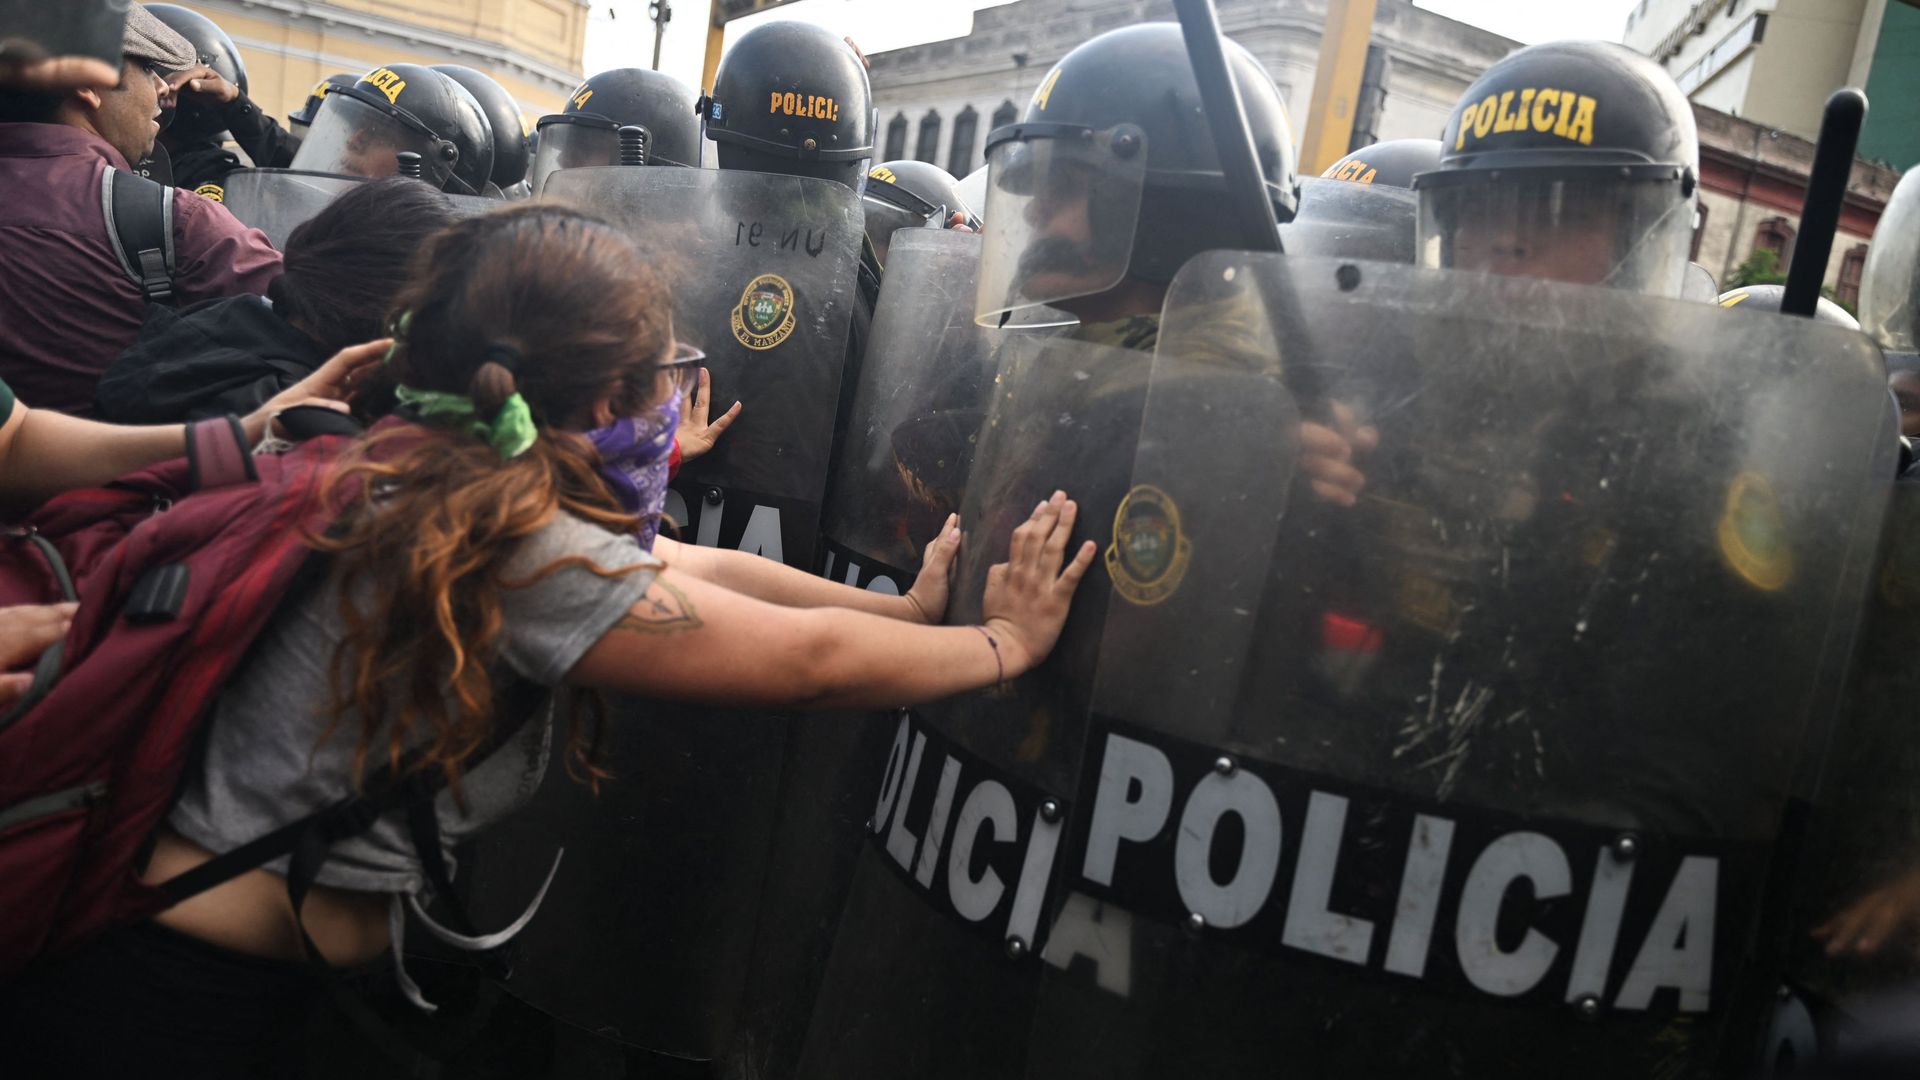 a young person in pigtails in  Peru pushes against a row of police officers in riot gear